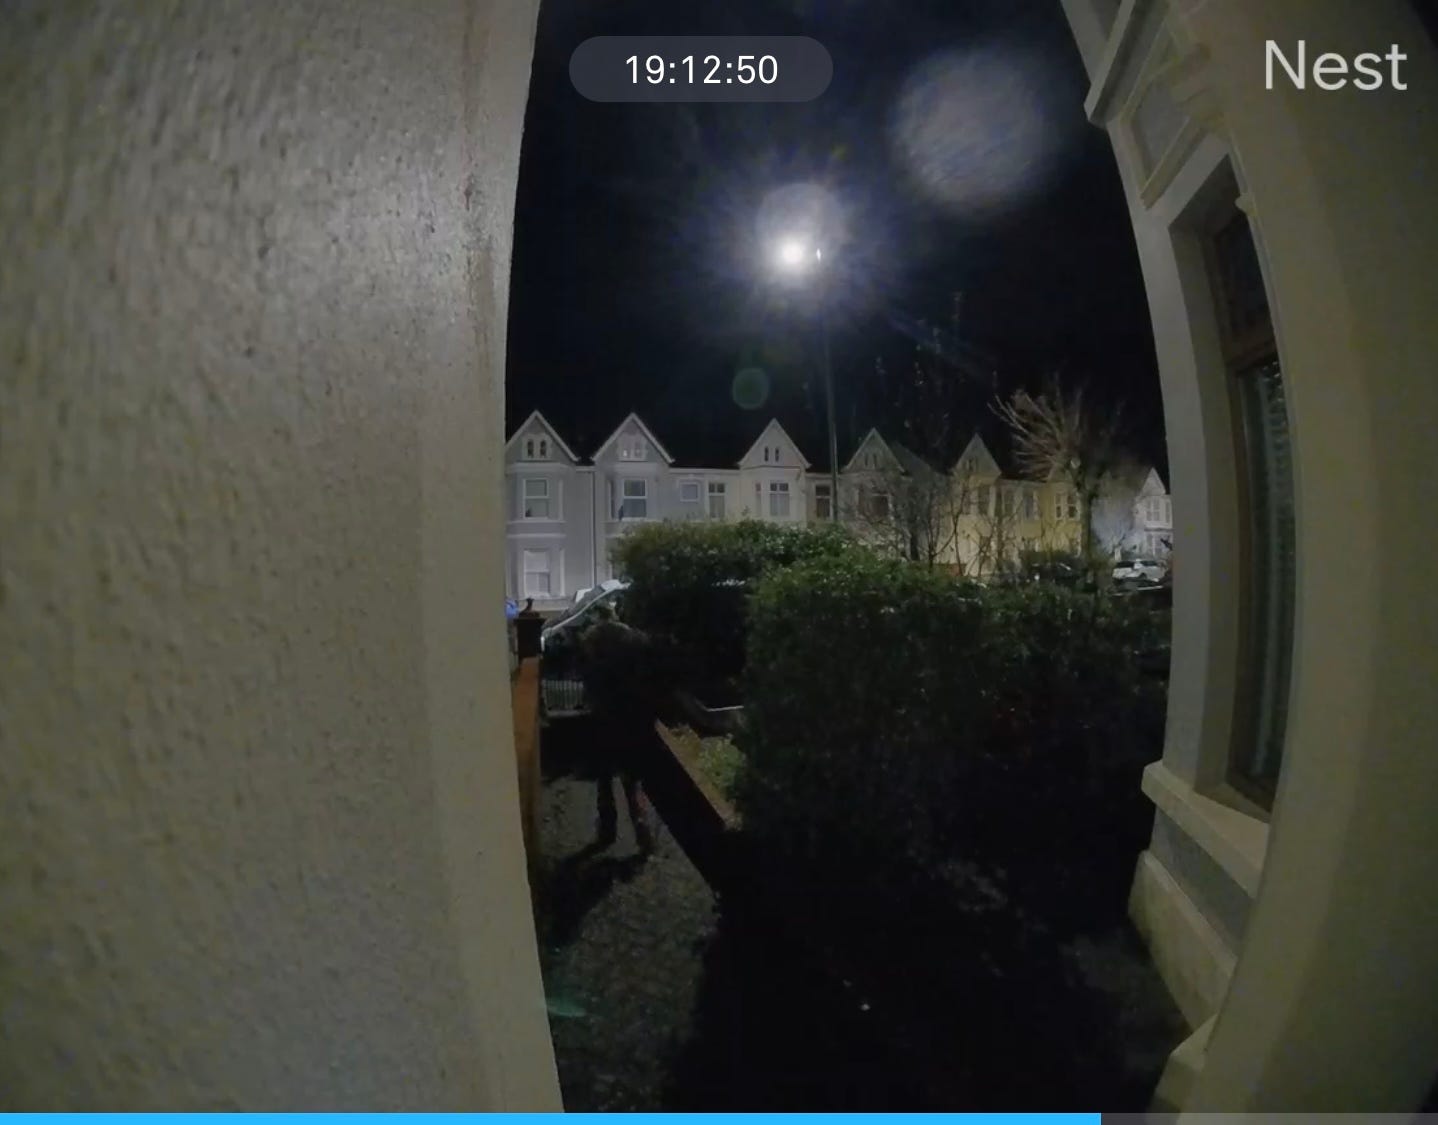 Ant is walking down the garden path in a still from video doorbell footage. The sky is black and the street lamplit.